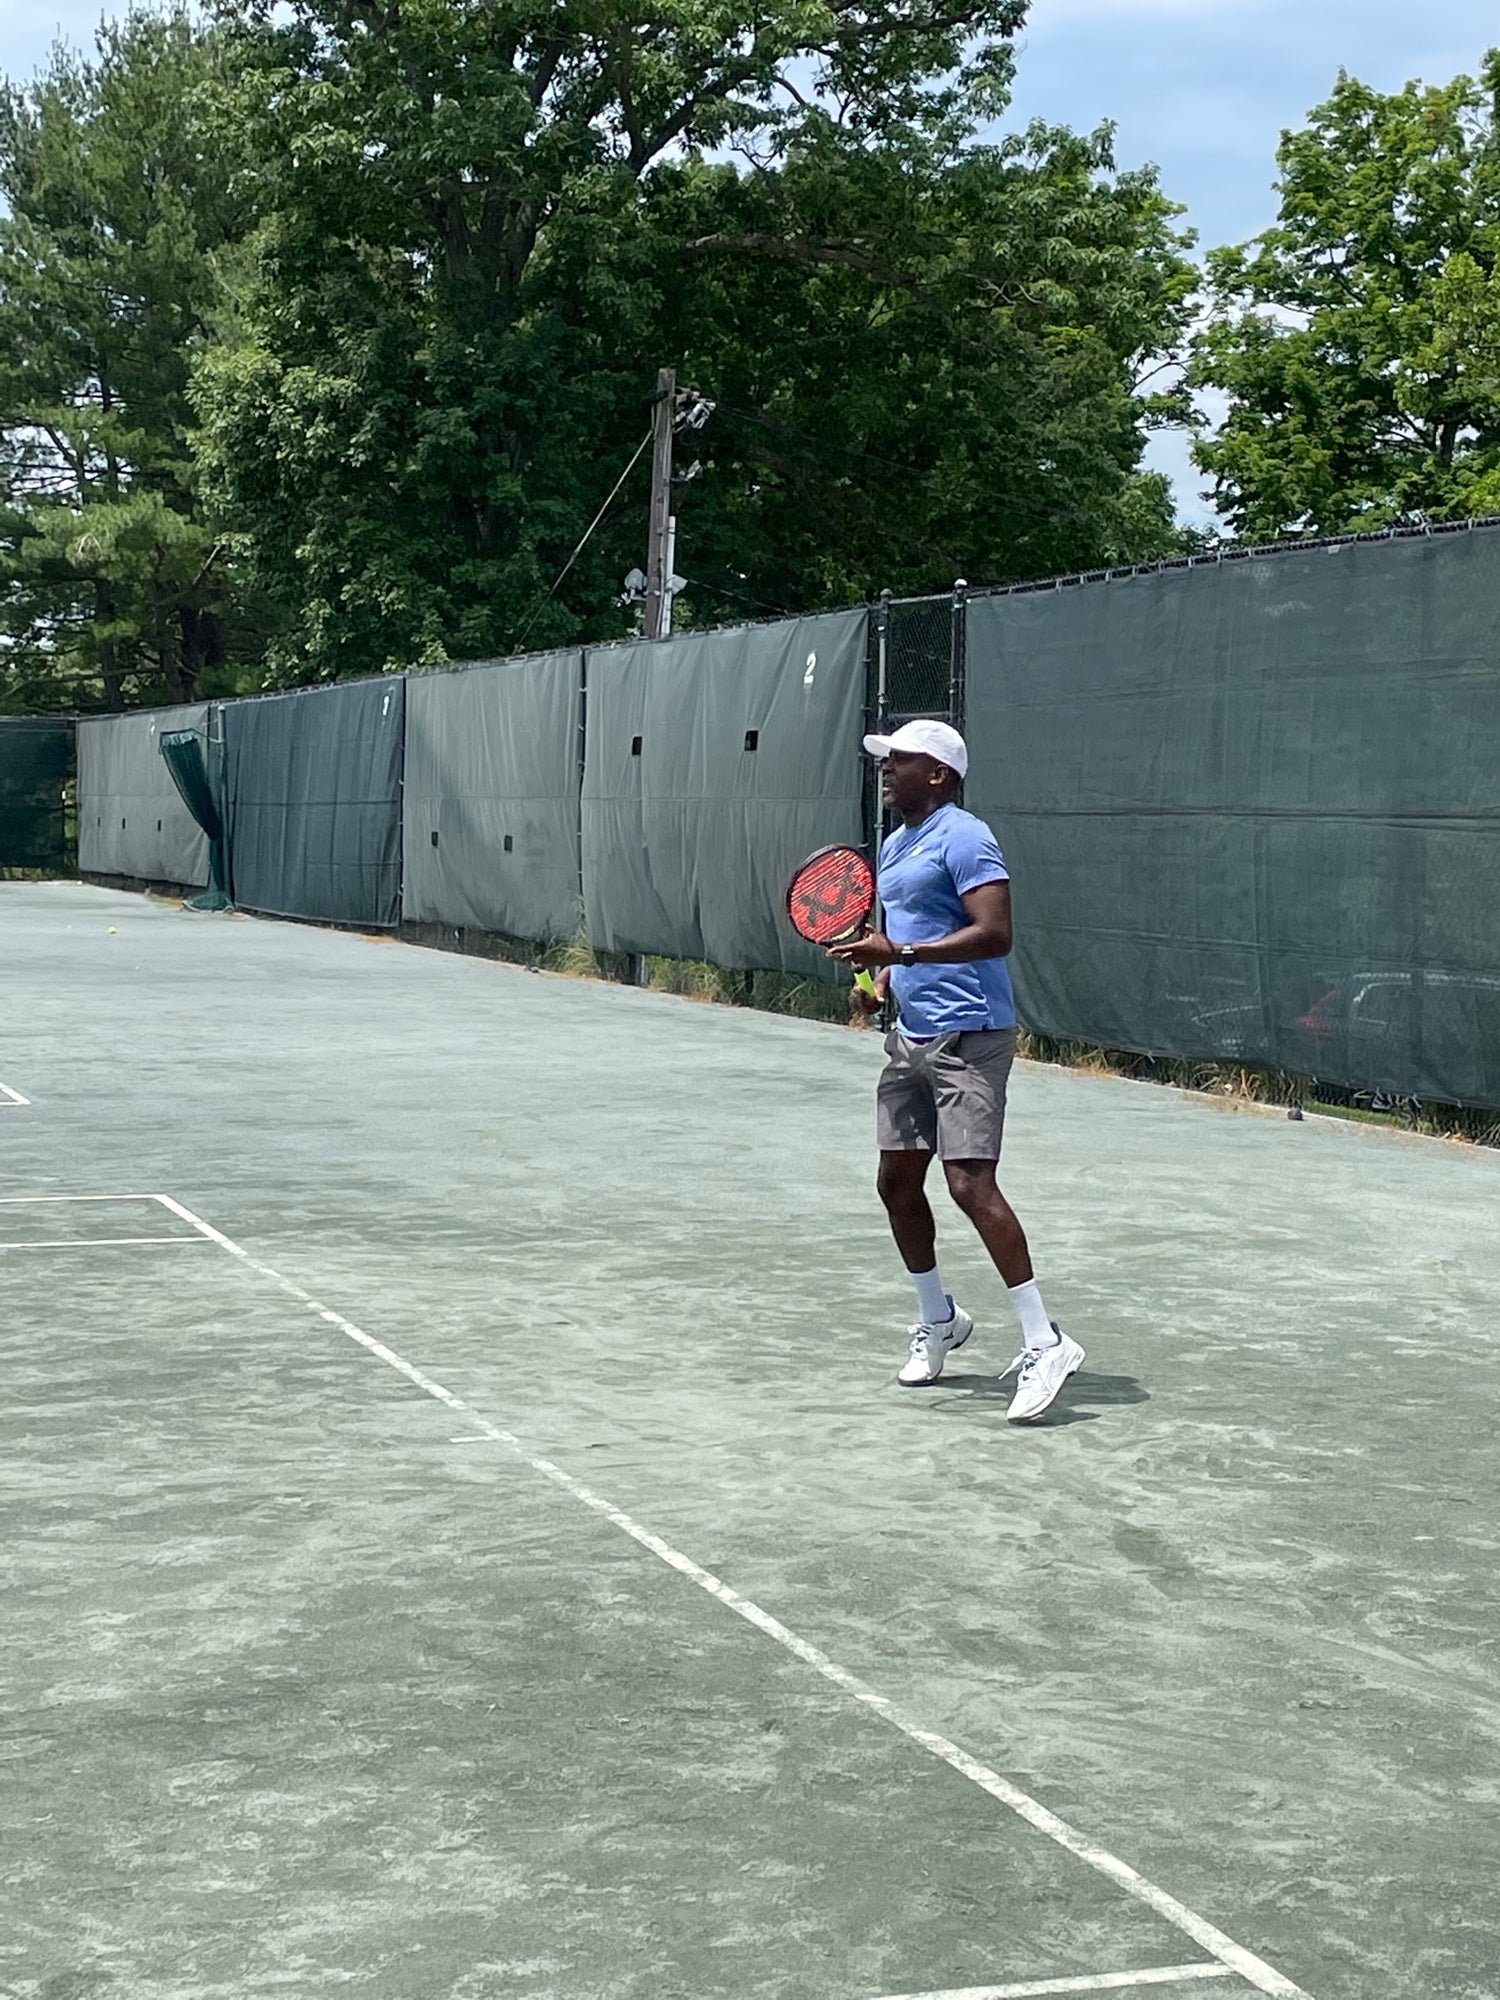 It's a vibe: a Westchester-based pro player's unique approach toward tennis